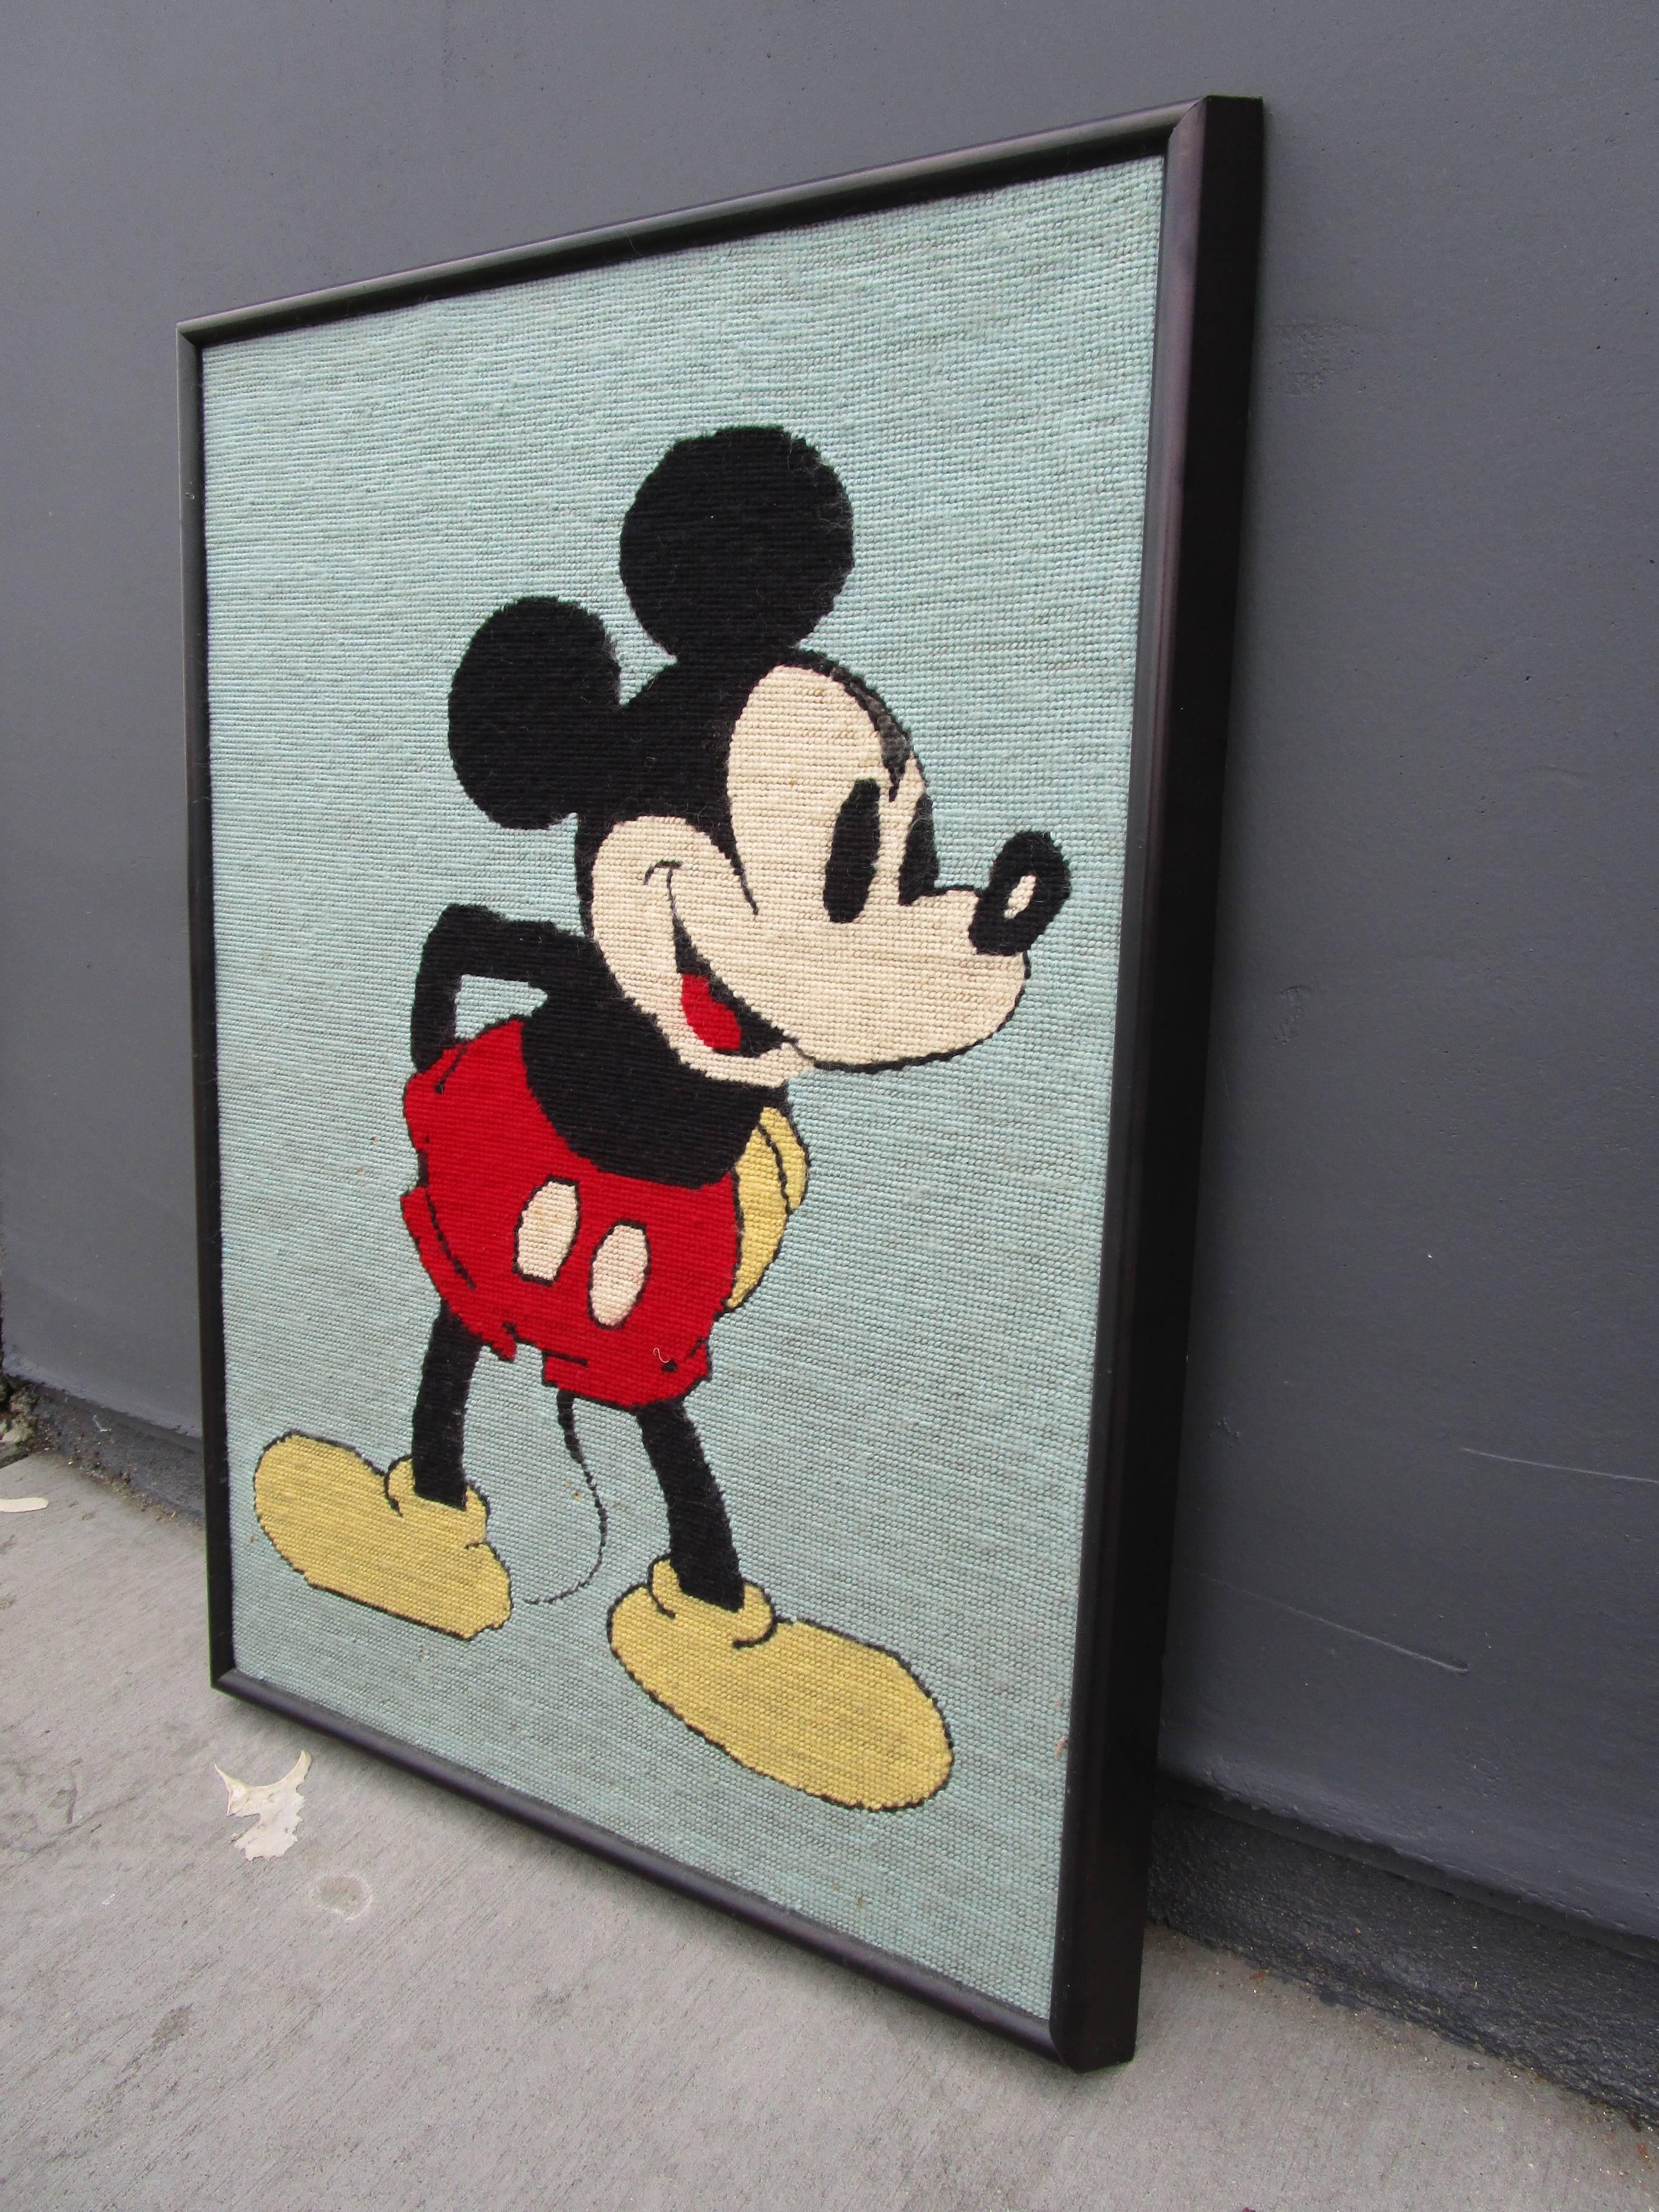 Needlepoint artwork of Mickey Mouse in original black frame. Background is a robin's egg blue.